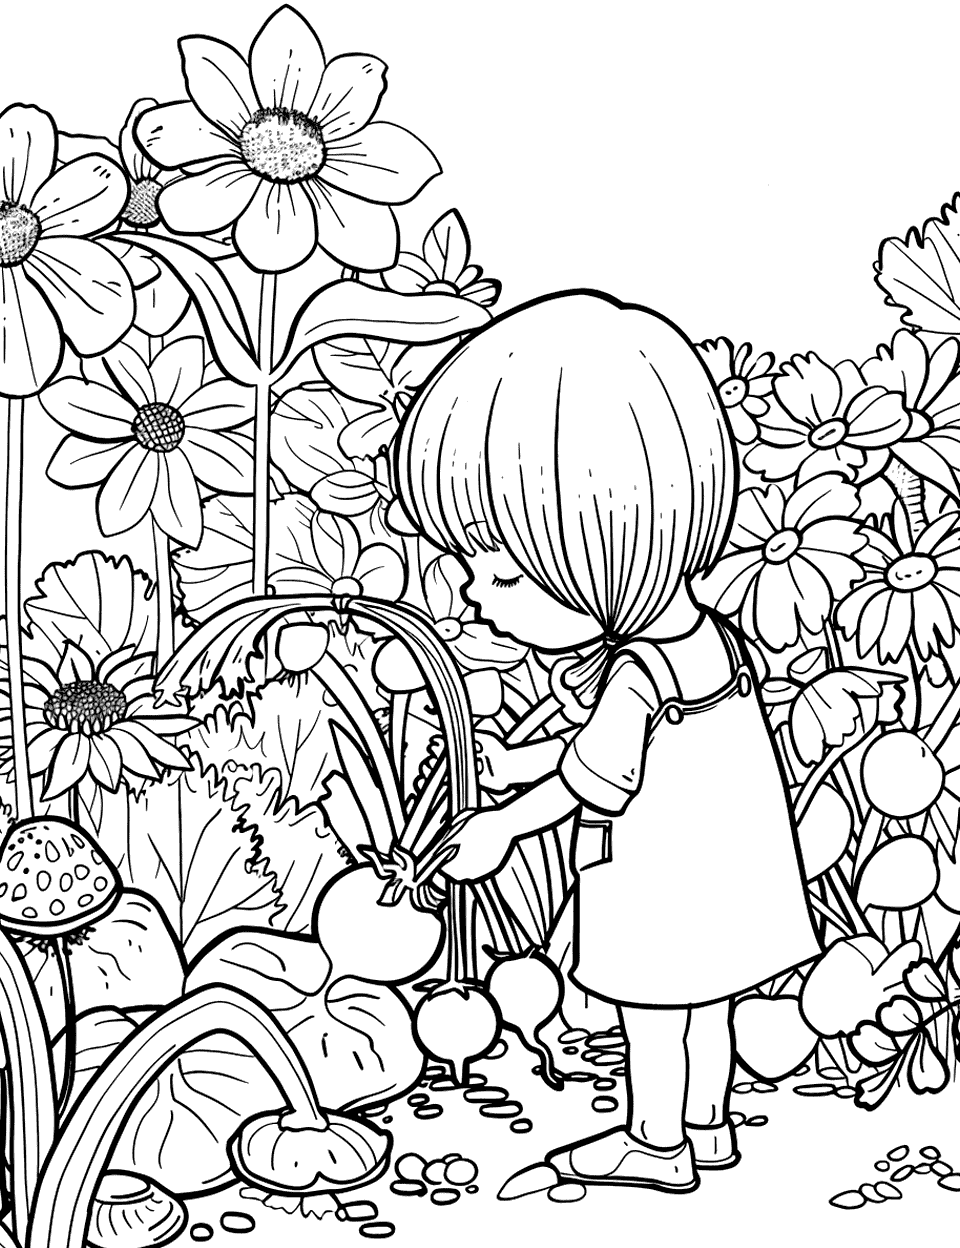 Picking Vegetables Garden Coloring Page - A child gathering fresh vegetables in a lush vegetable garden.